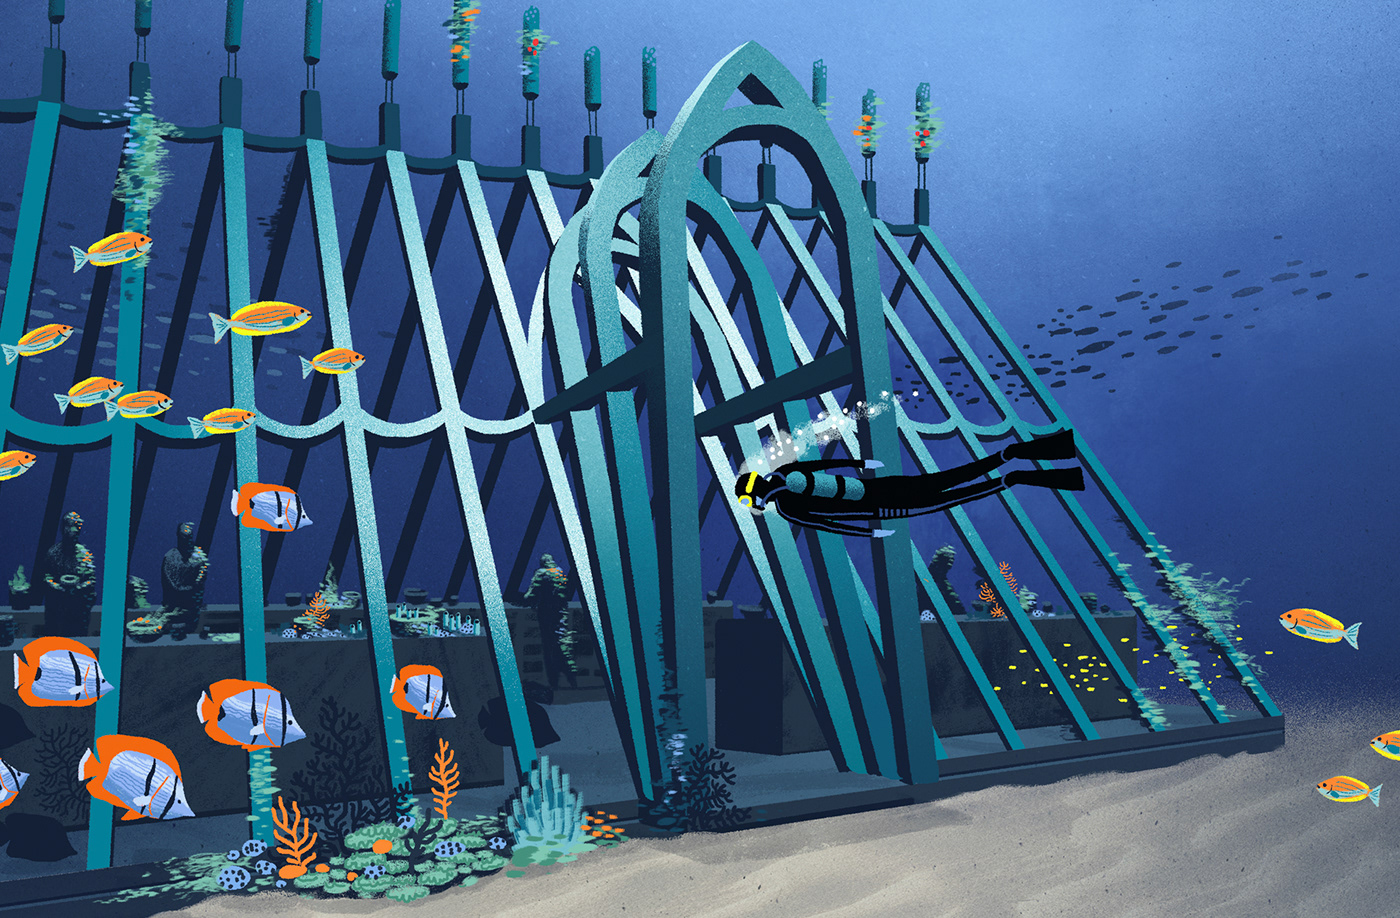 eco editorial environmental green ILLUSTRATION  science Sustainable tech underwater